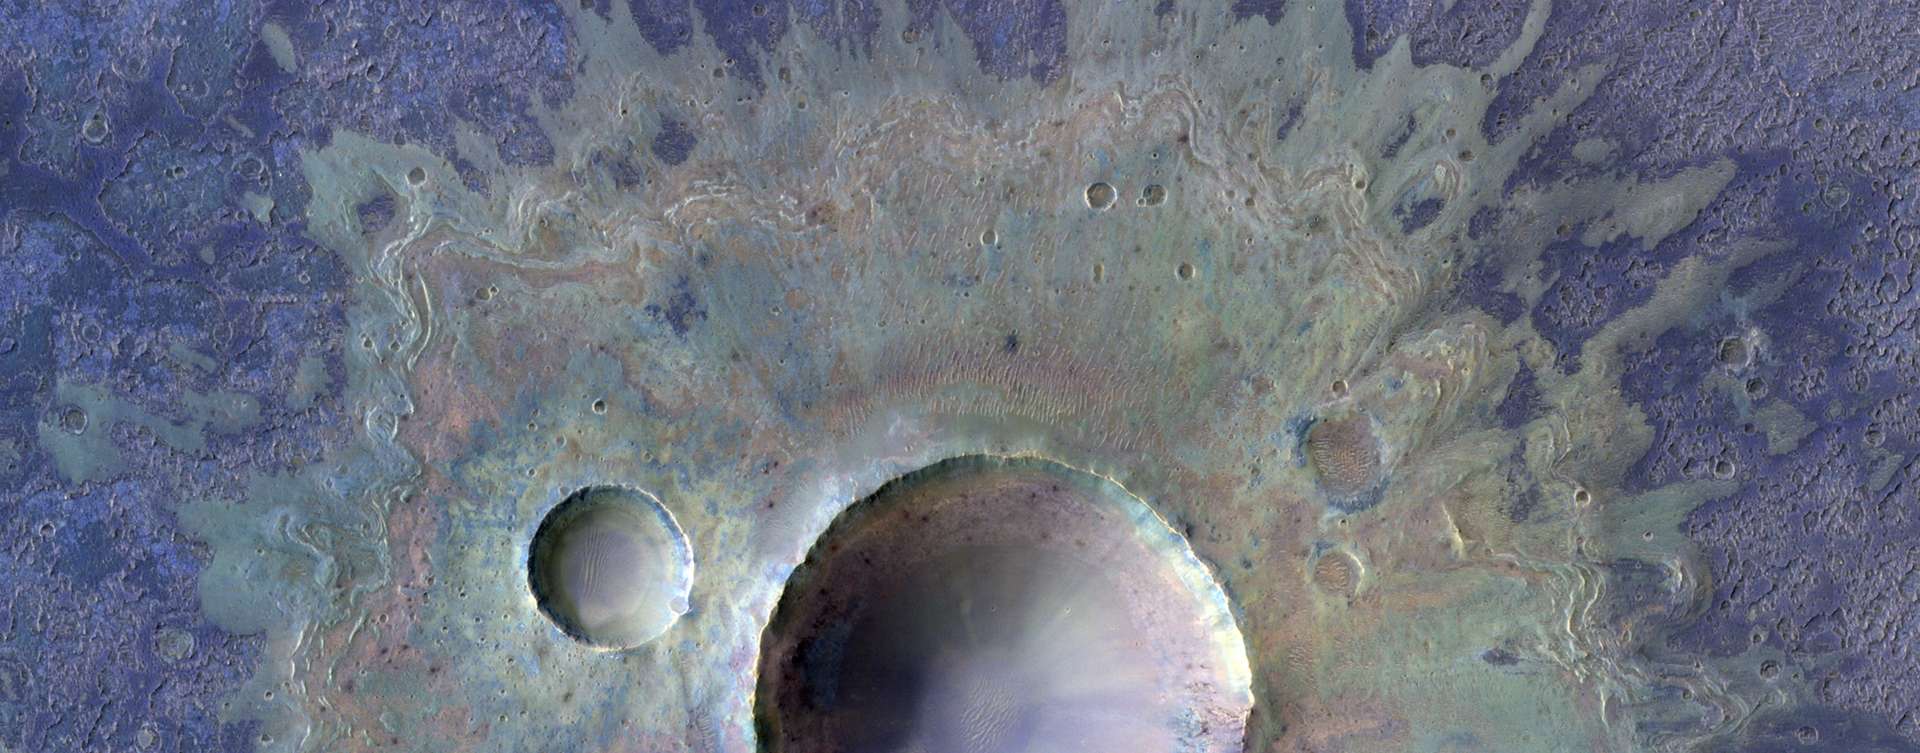 This magnificent crater reveals the presence of water ice on Mars.